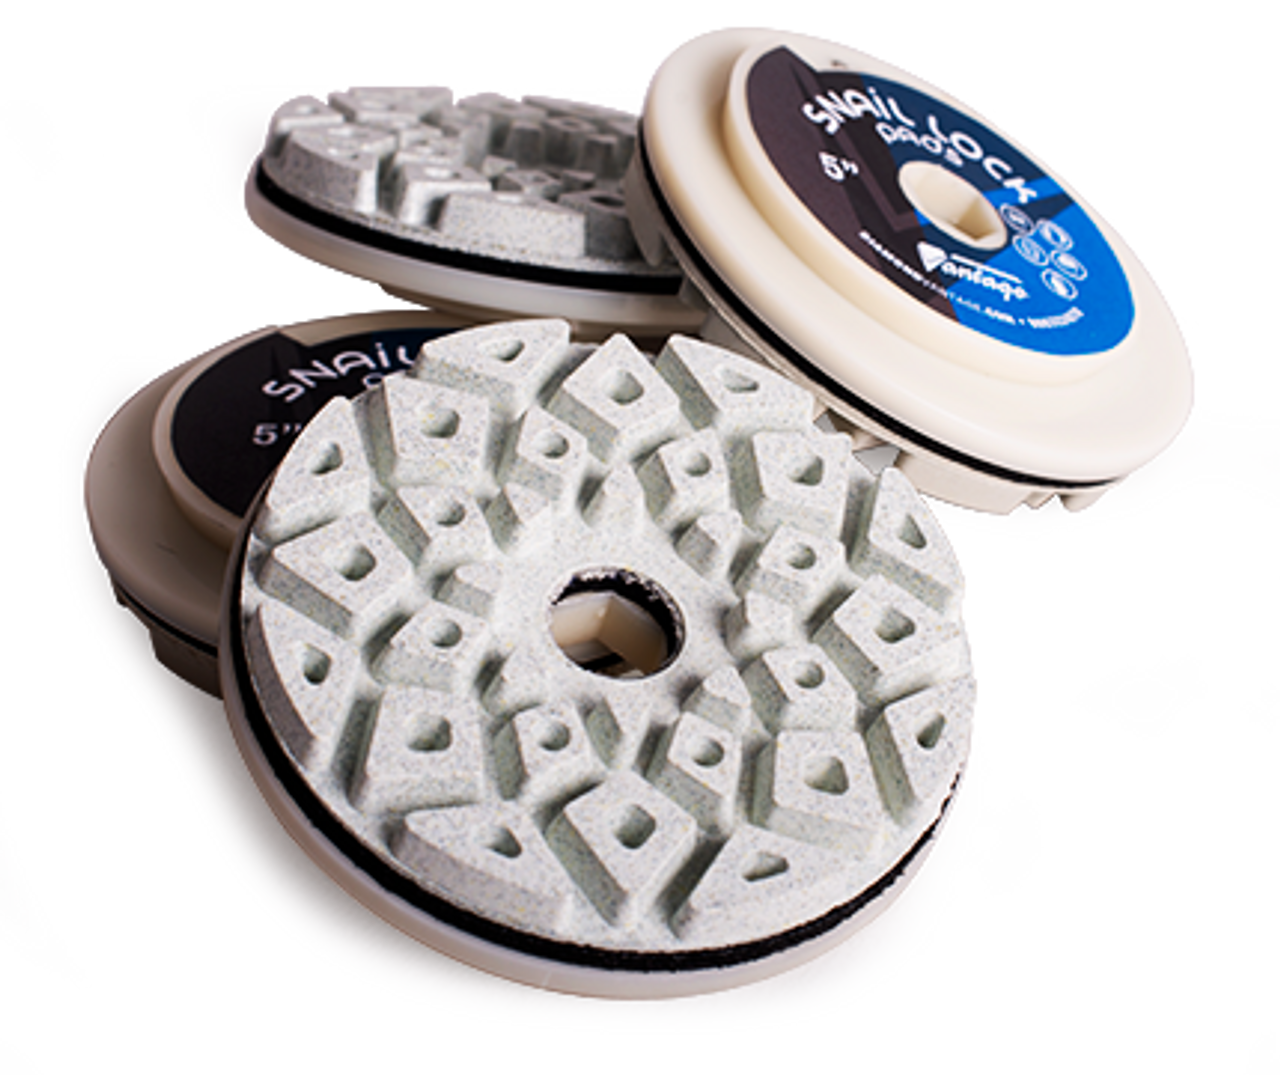 Diamond Vantage 6? x Snail Lock In-Line Polishing Pad for Natural and Engineered Stone, 1500 Grit